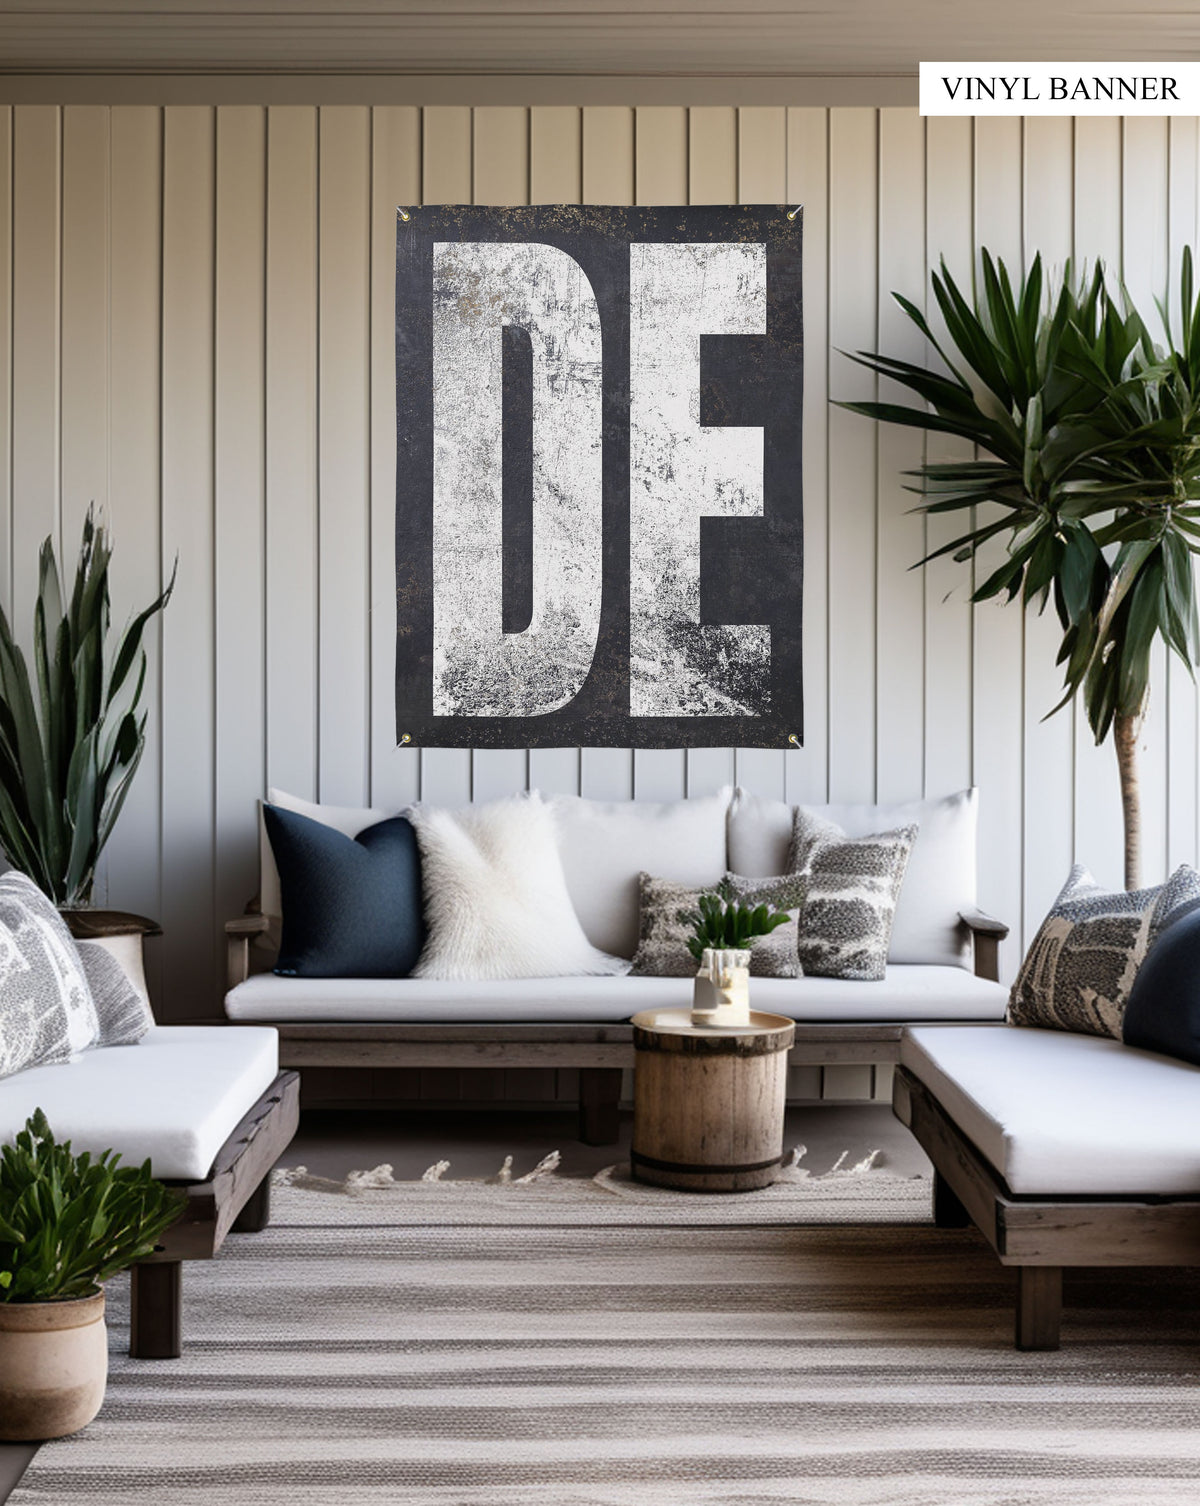 "Sophisticated 'DE' Delaware Banner: White on black vinyl, perfect for showcasing Delaware's heritage indoors or outdoors."